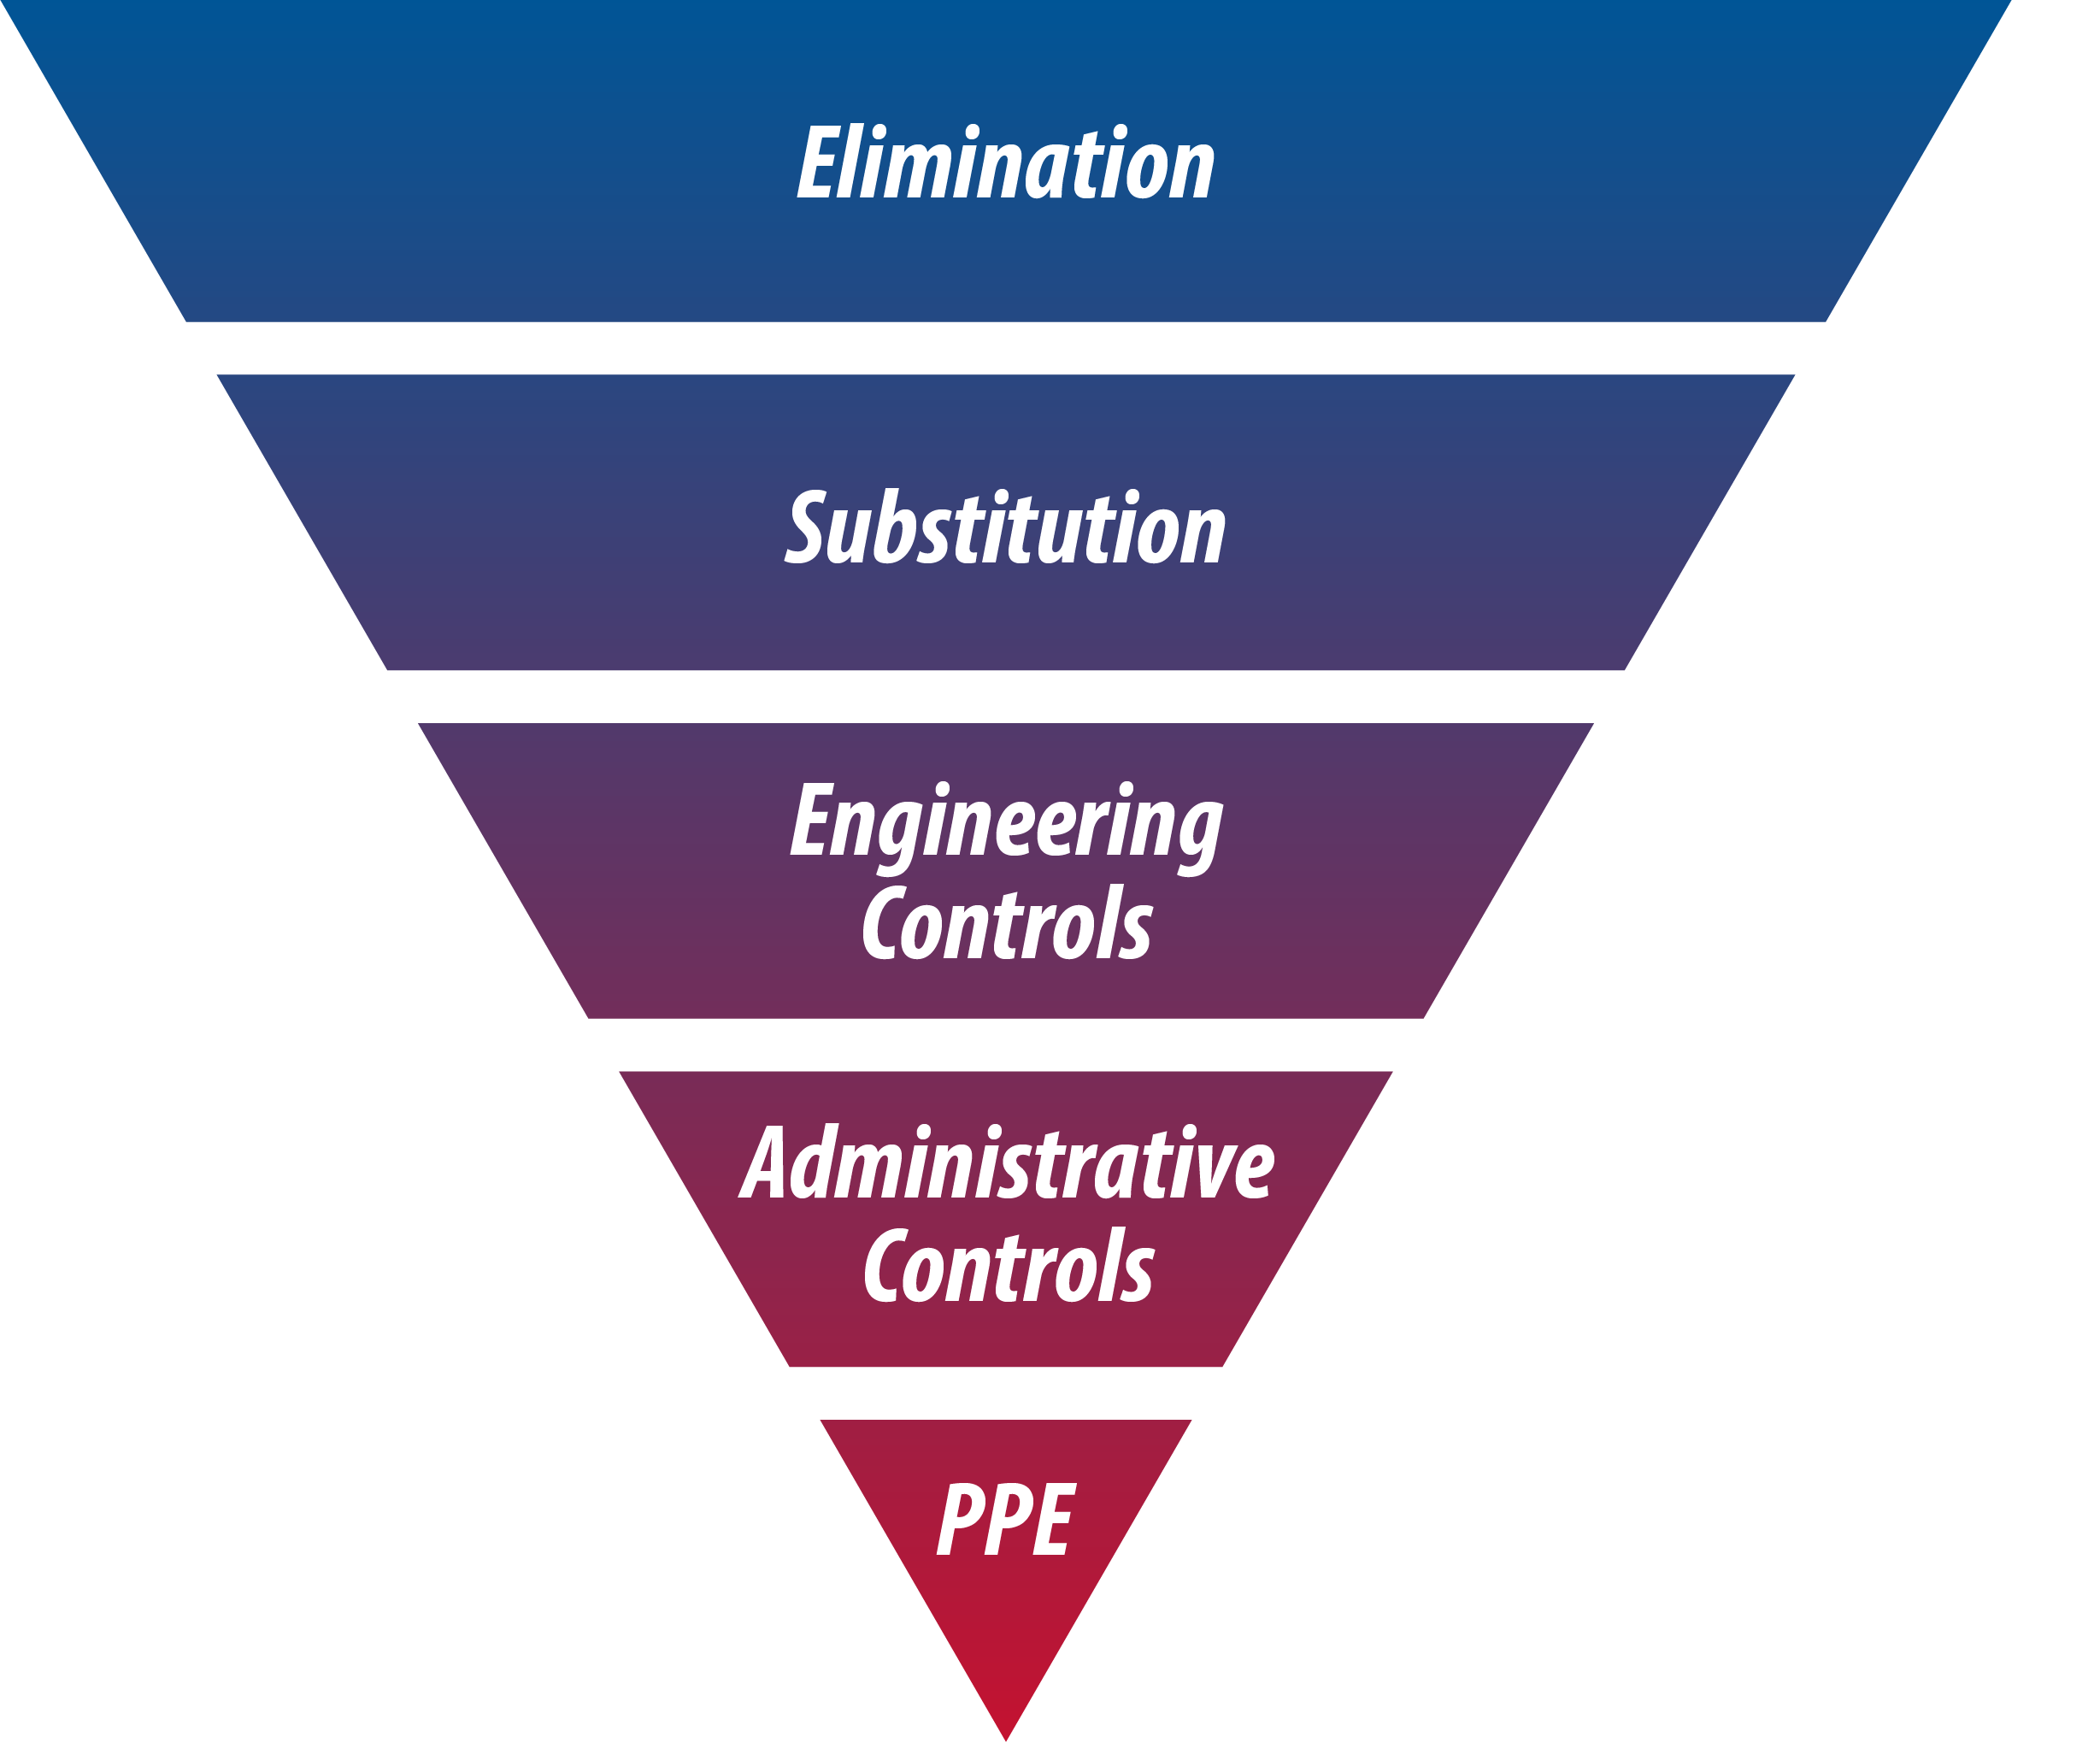 Robovent suggest using Maslow's Hierarchy of Controls principle to prioritize safety measures in the workplace.